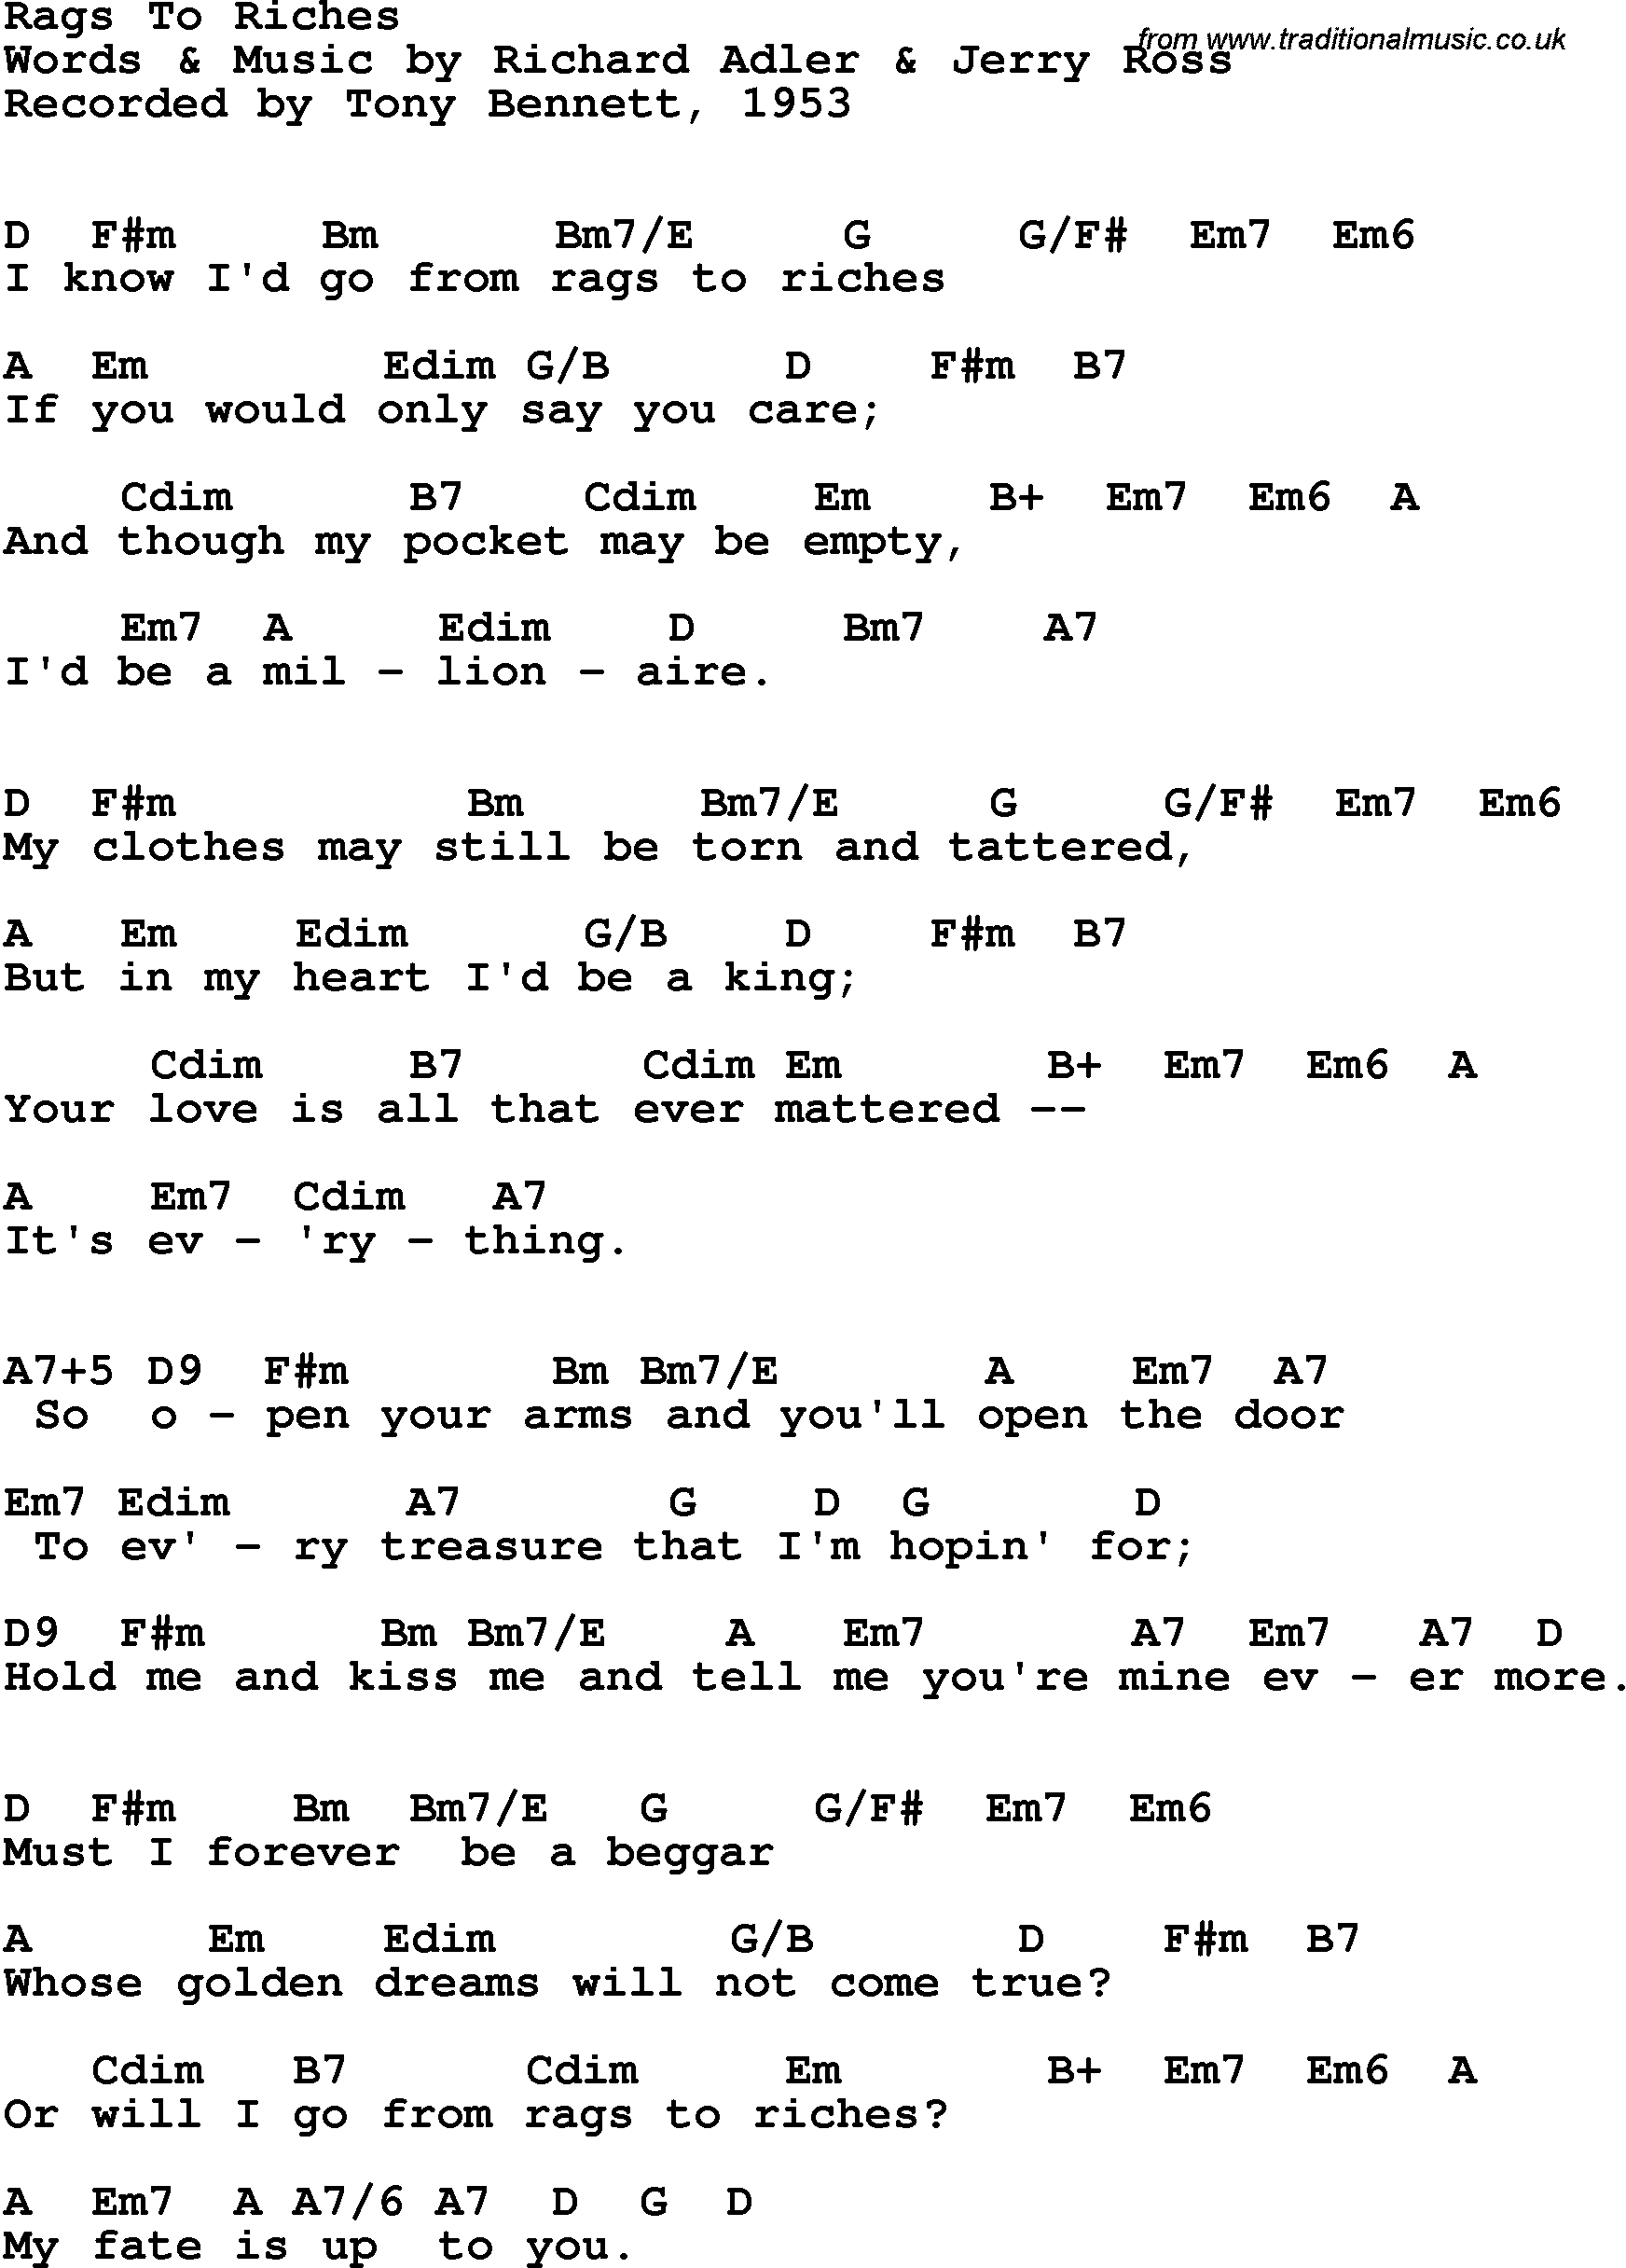 Song Lyrics with guitar chords for Rags To Riches - Tony Bennett, 1953